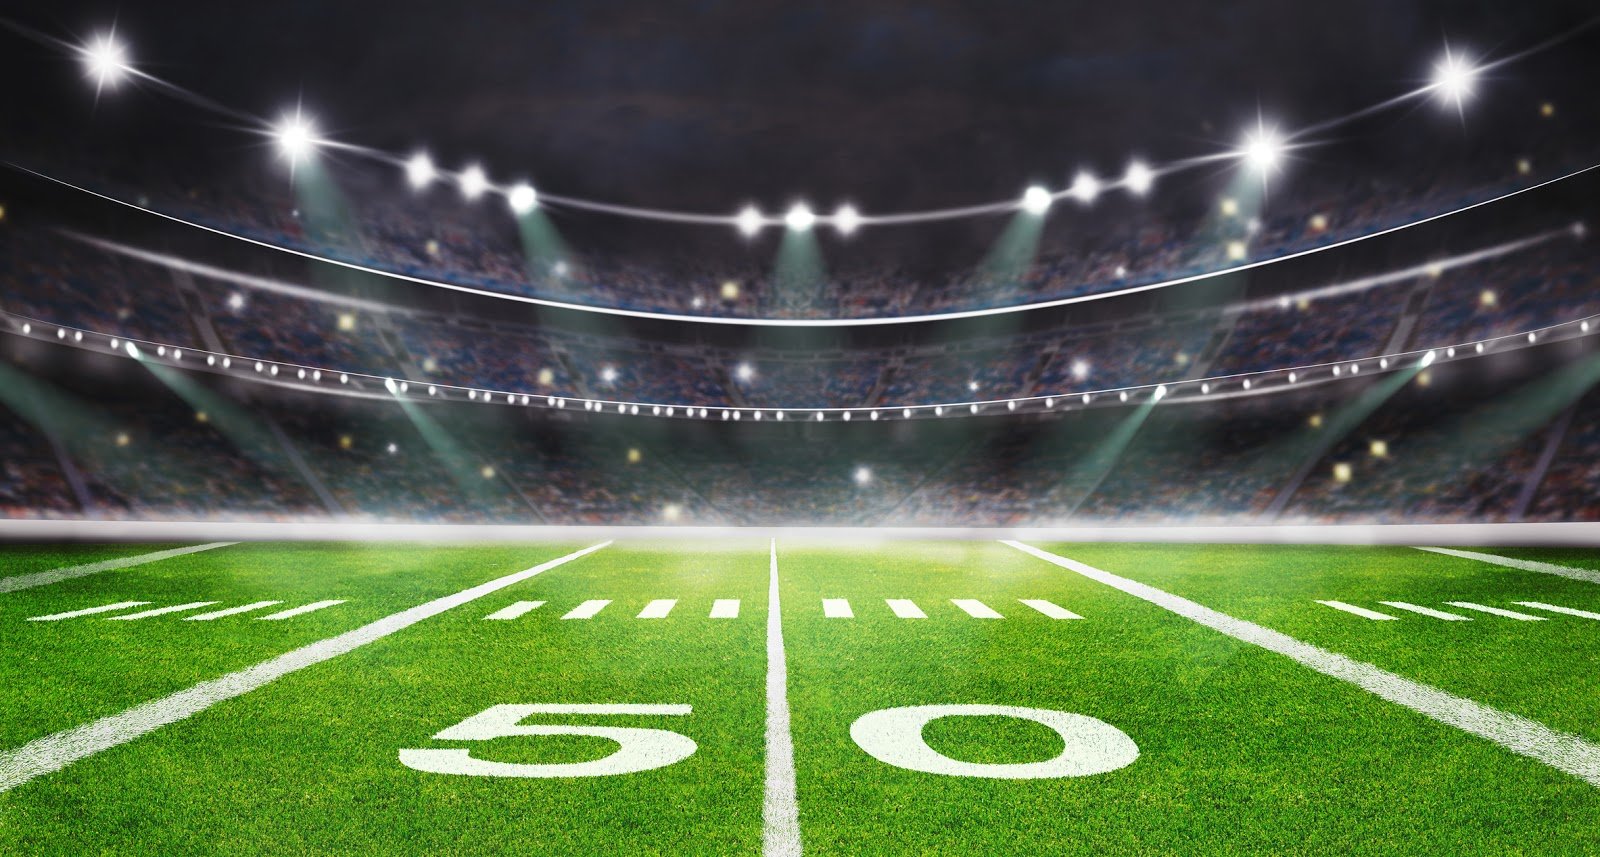 4 Cybersecurity Lessons We Can Learn From Football